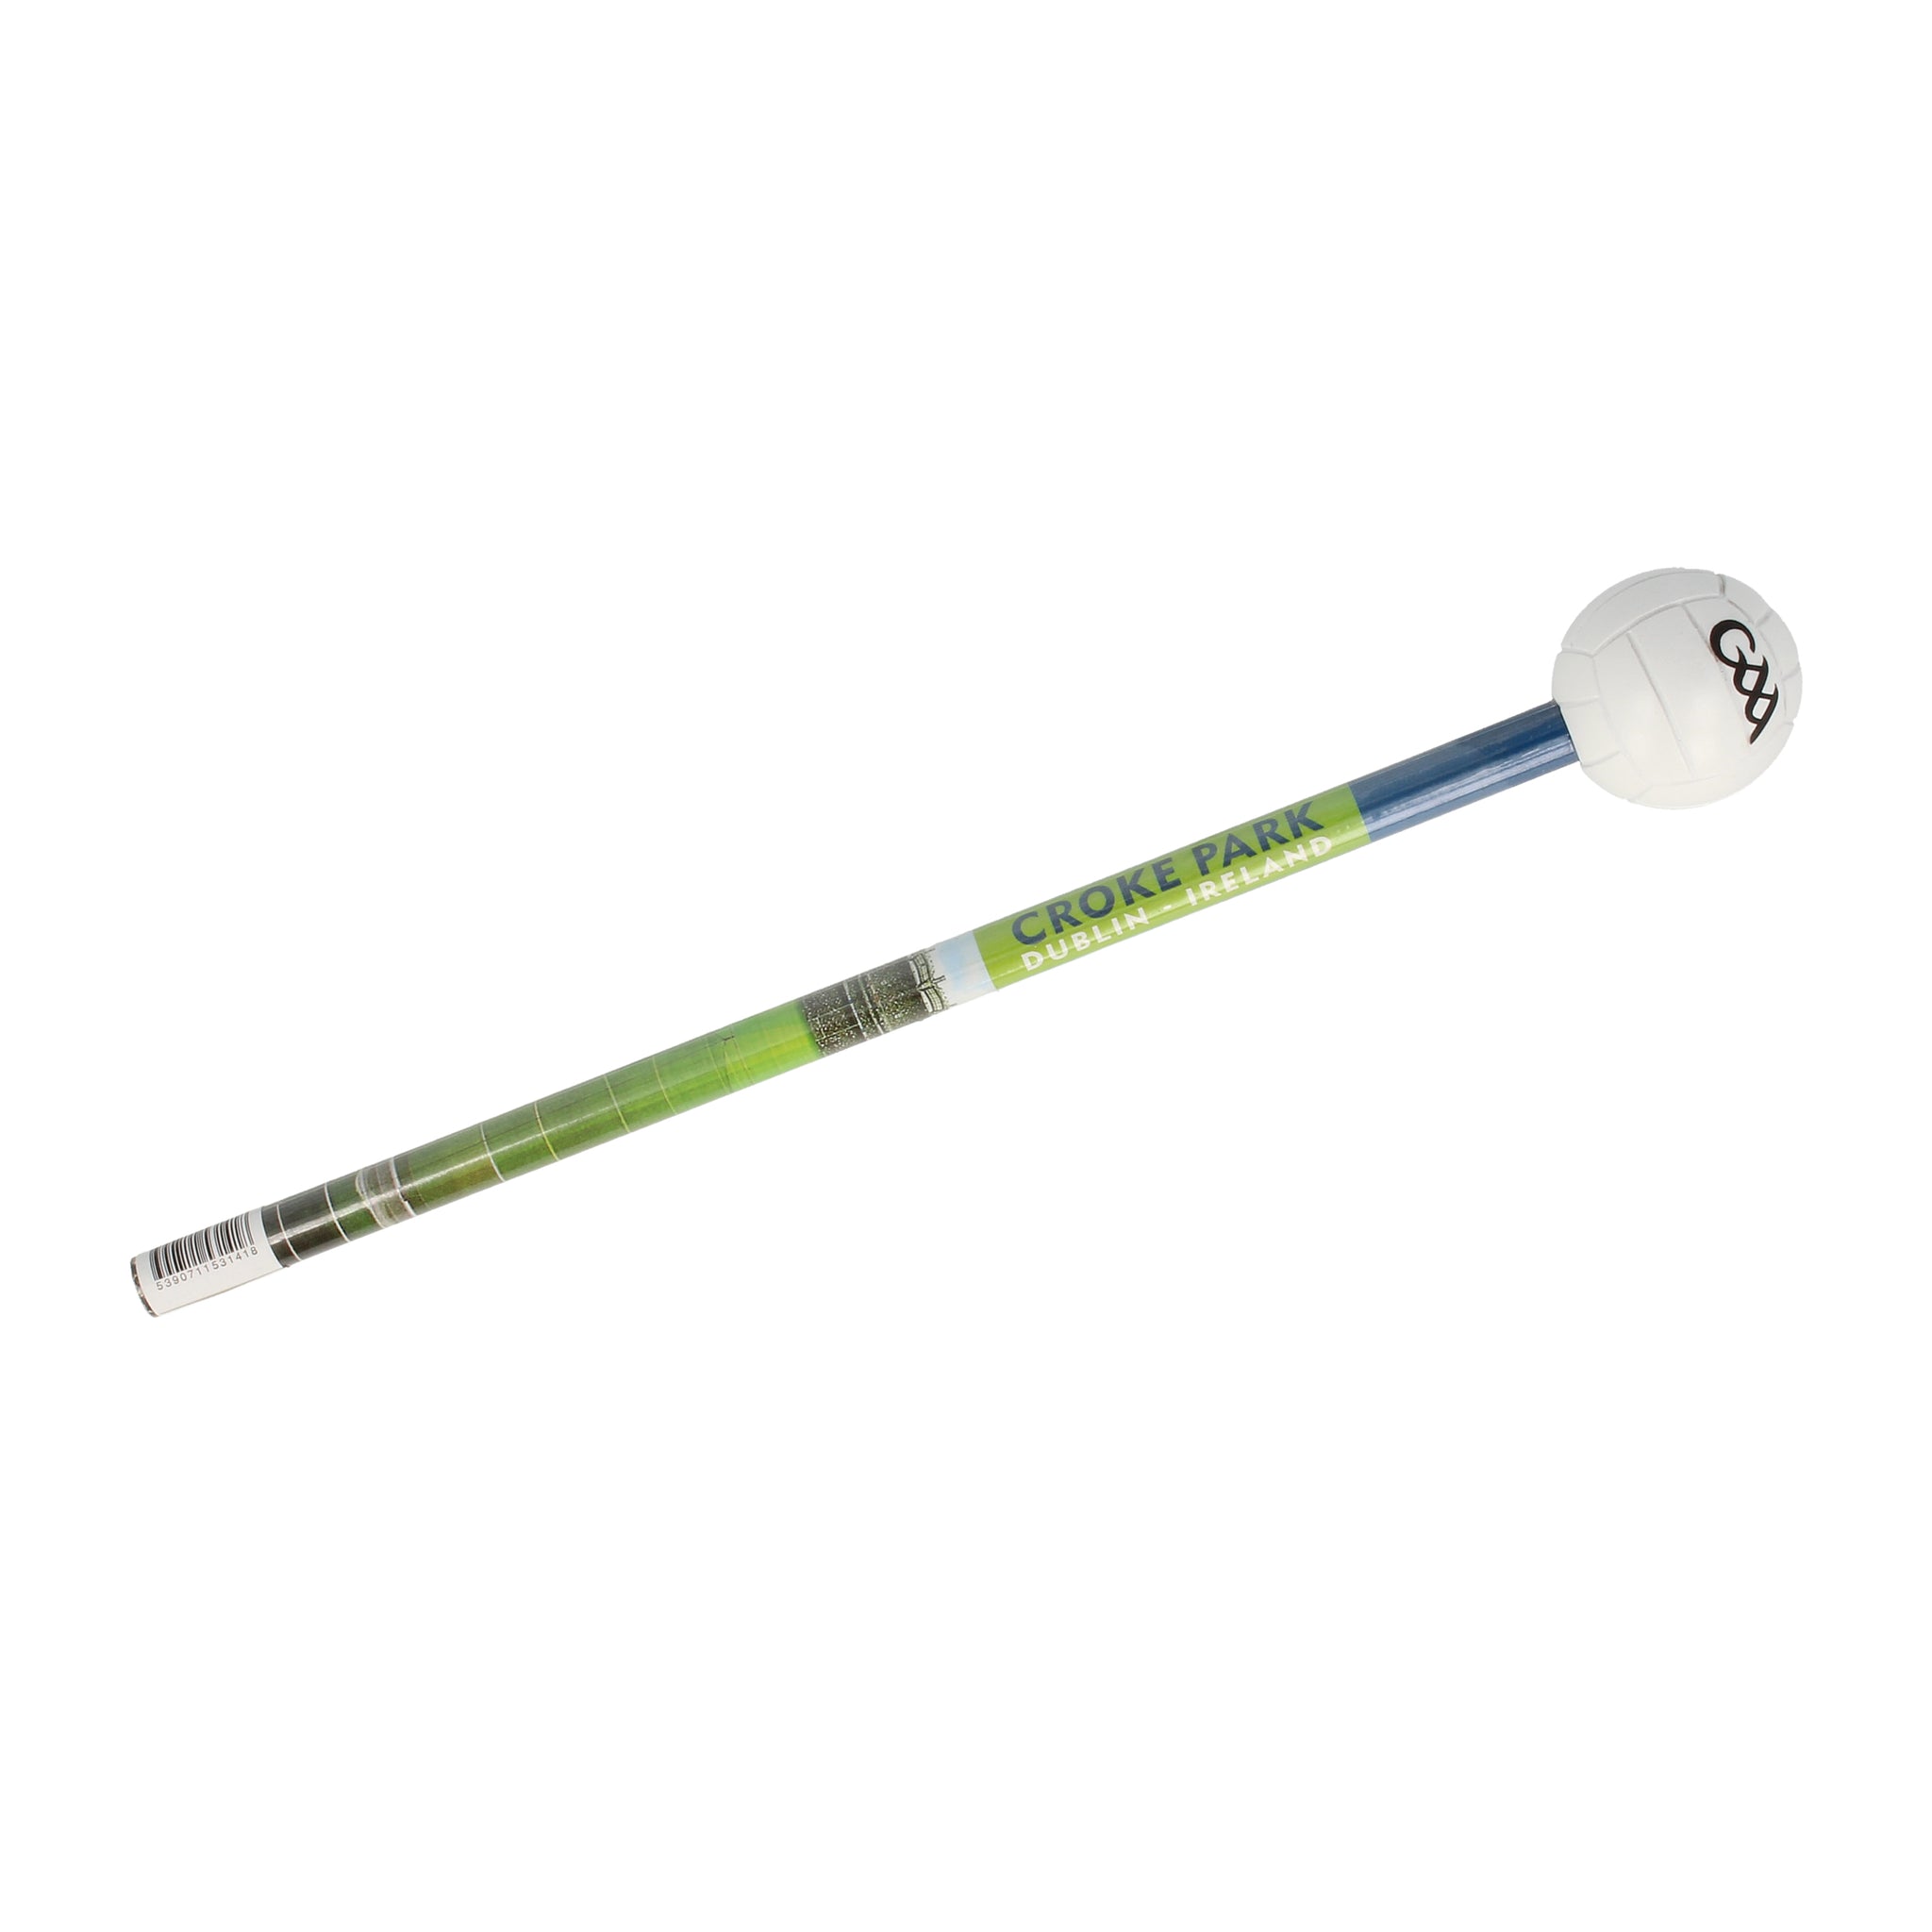 Croke Park pencil with football topper